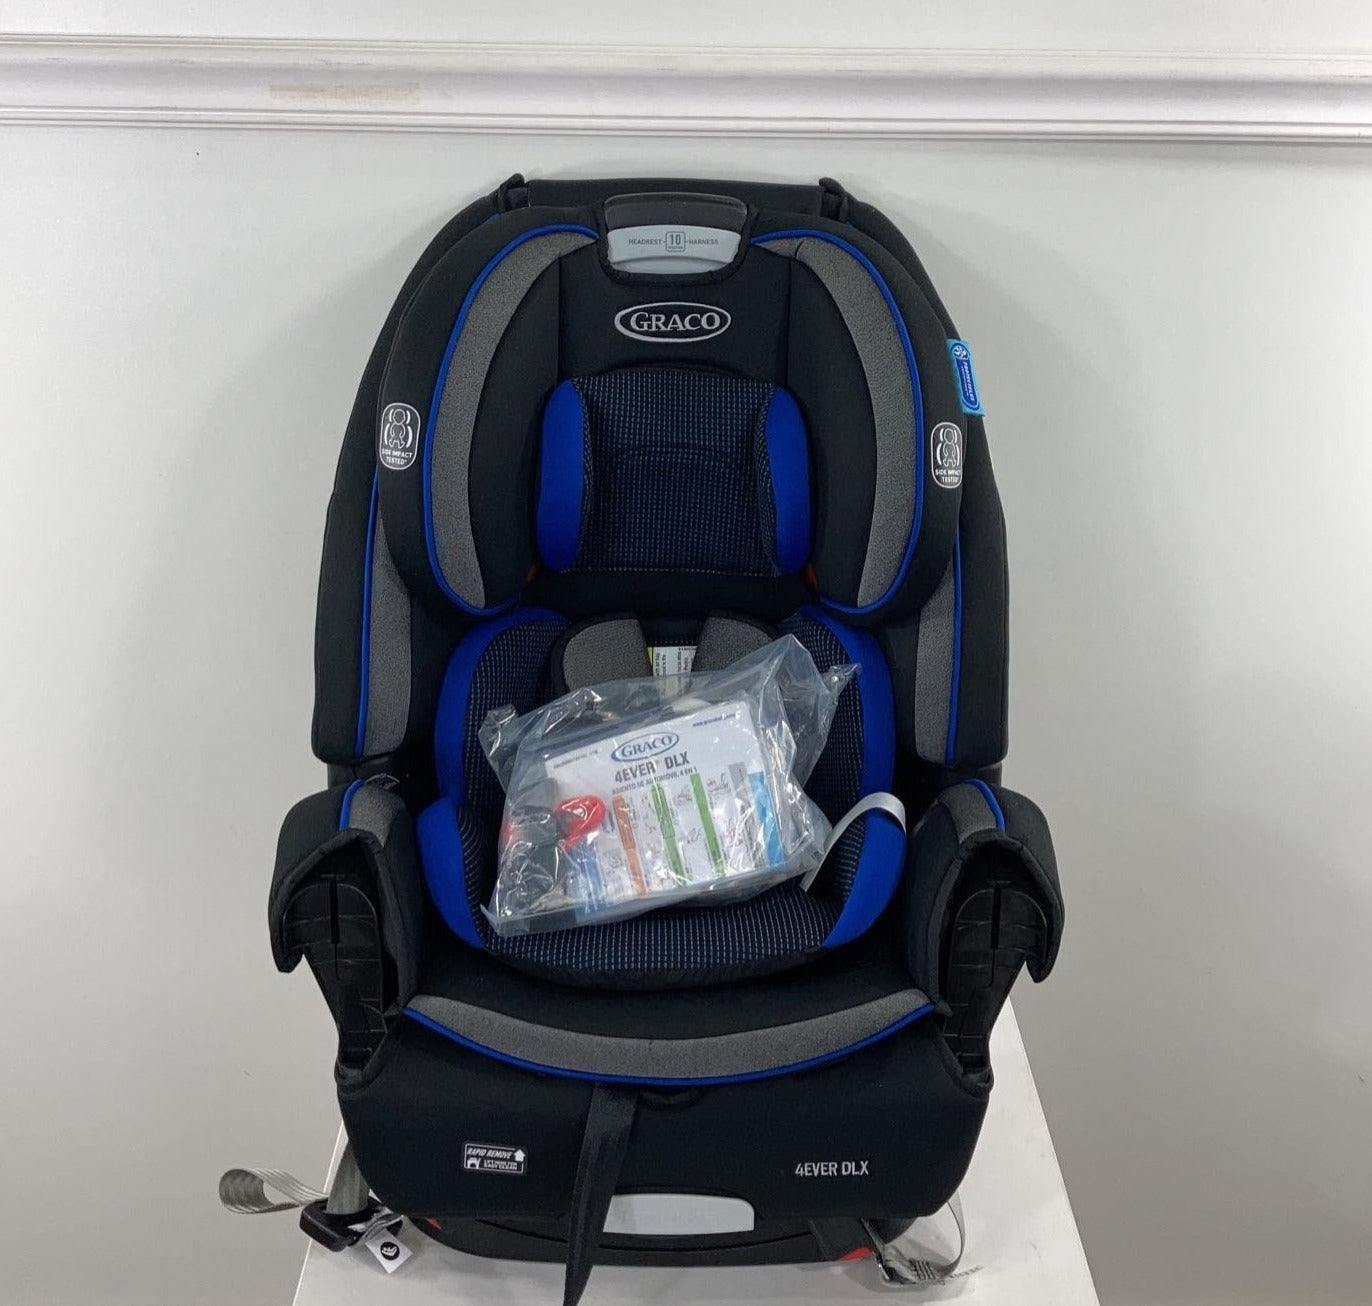 Graco 4ever Dlx 4 In 1 Car Seat Kendrick